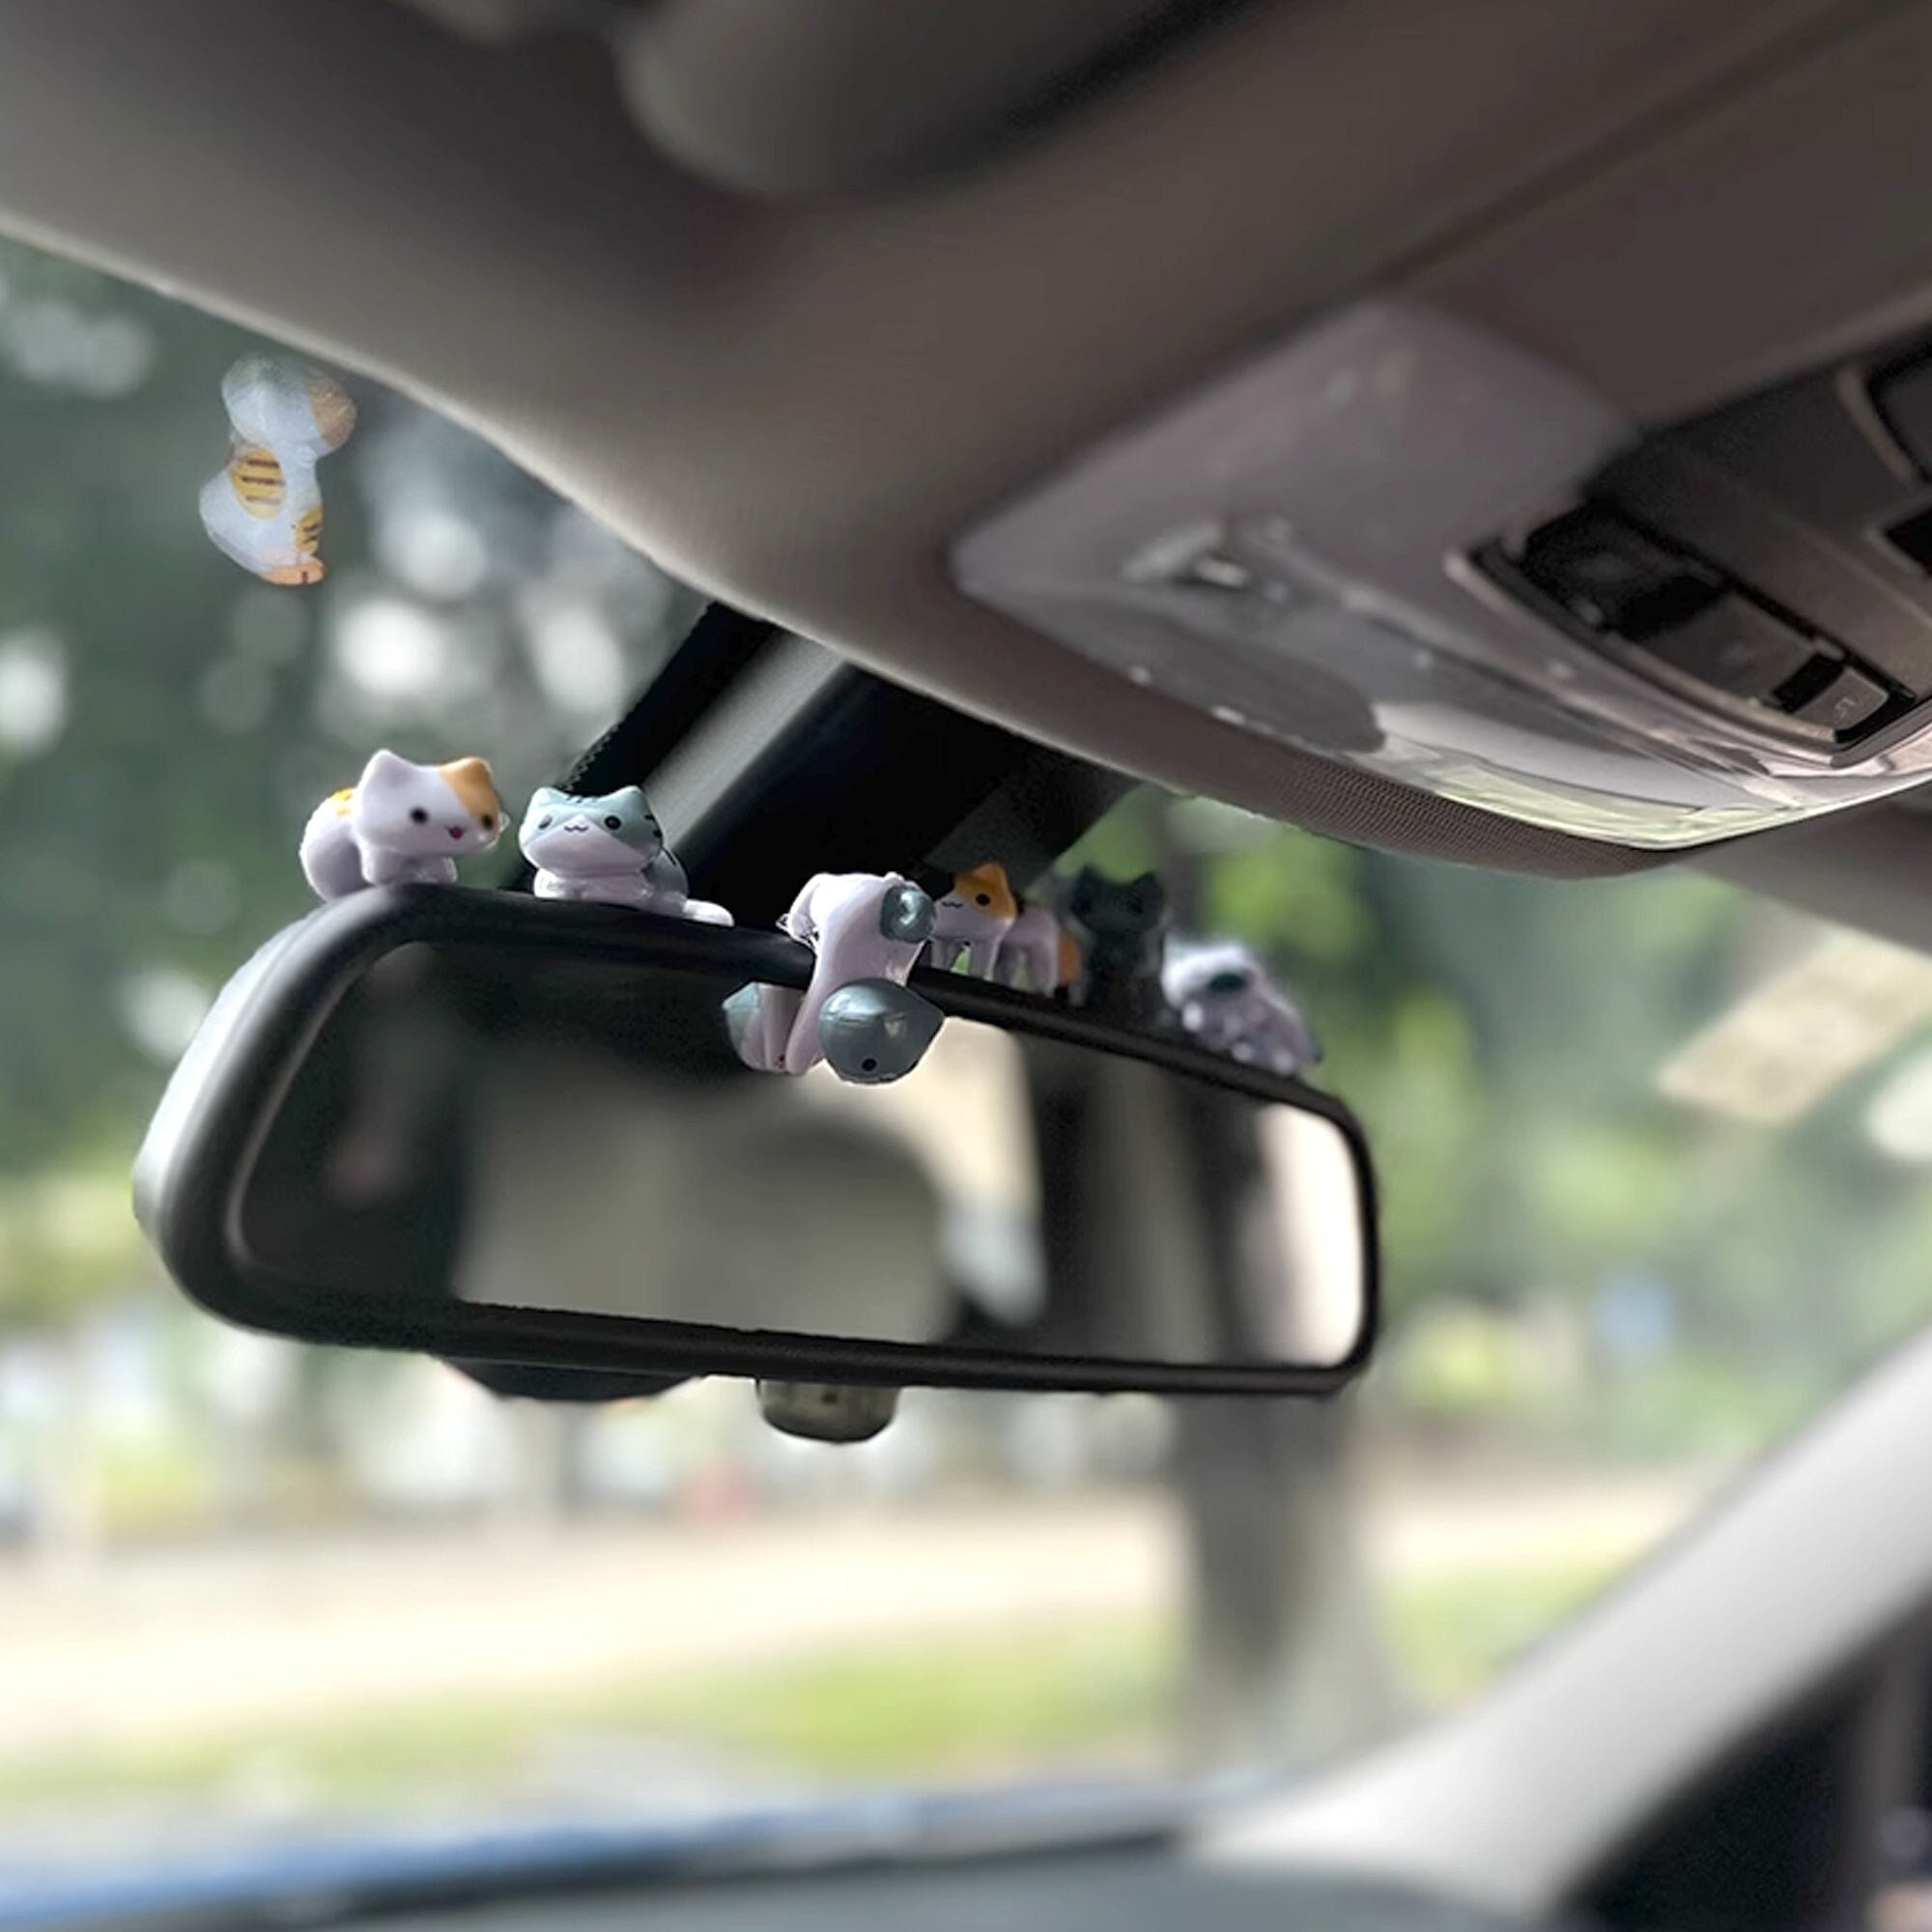 Cute Anime Faceless Swing Car Ornament Rearview Mirror Pendant Accessories  カオナシ